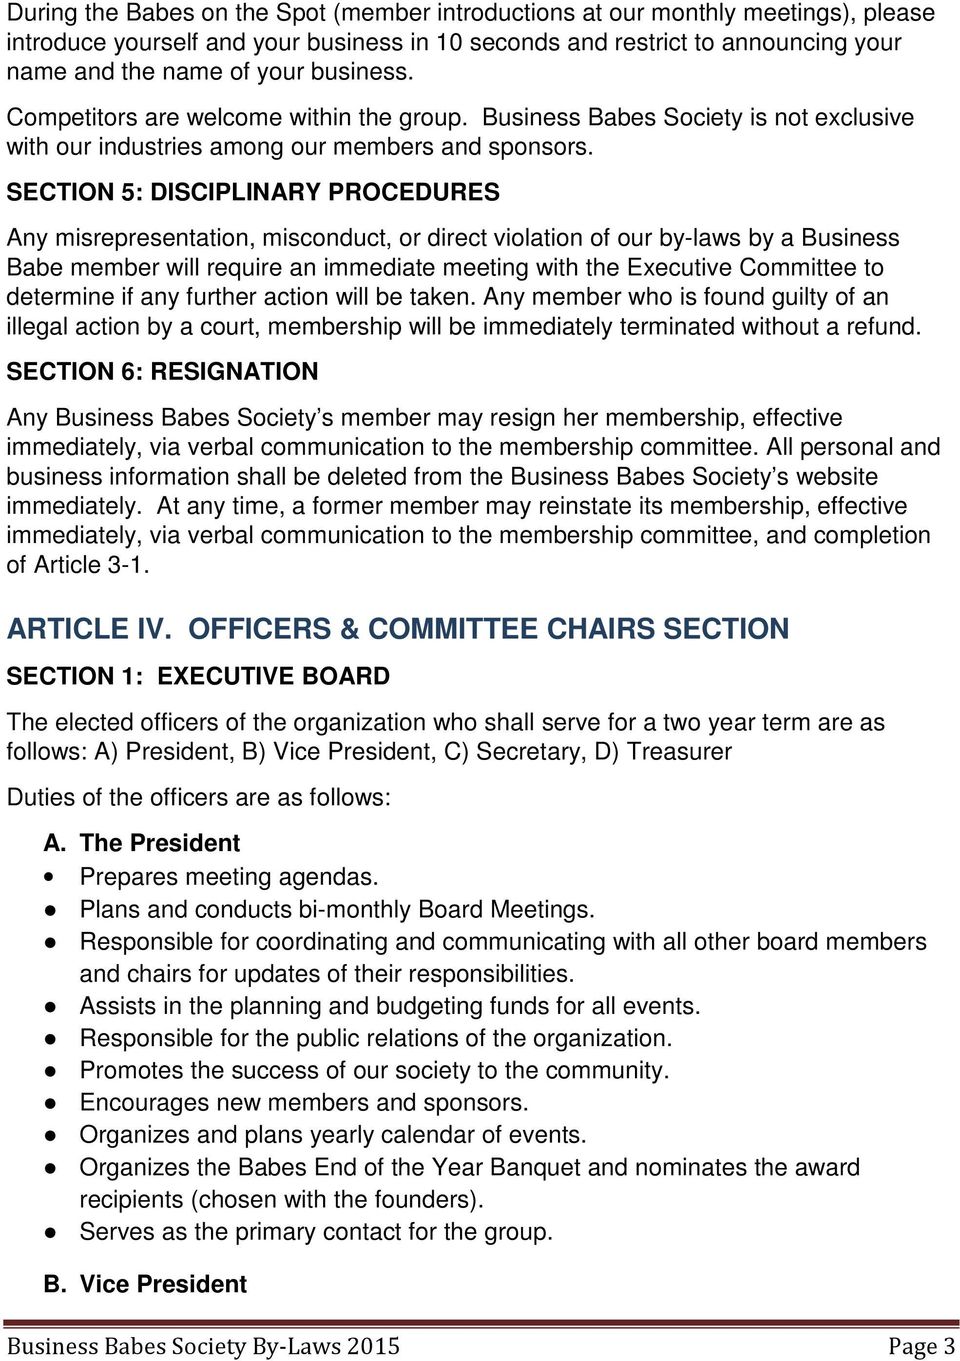 SECTION 5: DISCIPLINARY PROCEDURES Any misrepresentation, misconduct, or direct violation of our by-laws by a Business Babe member will require an immediate meeting with the Executive Committee to